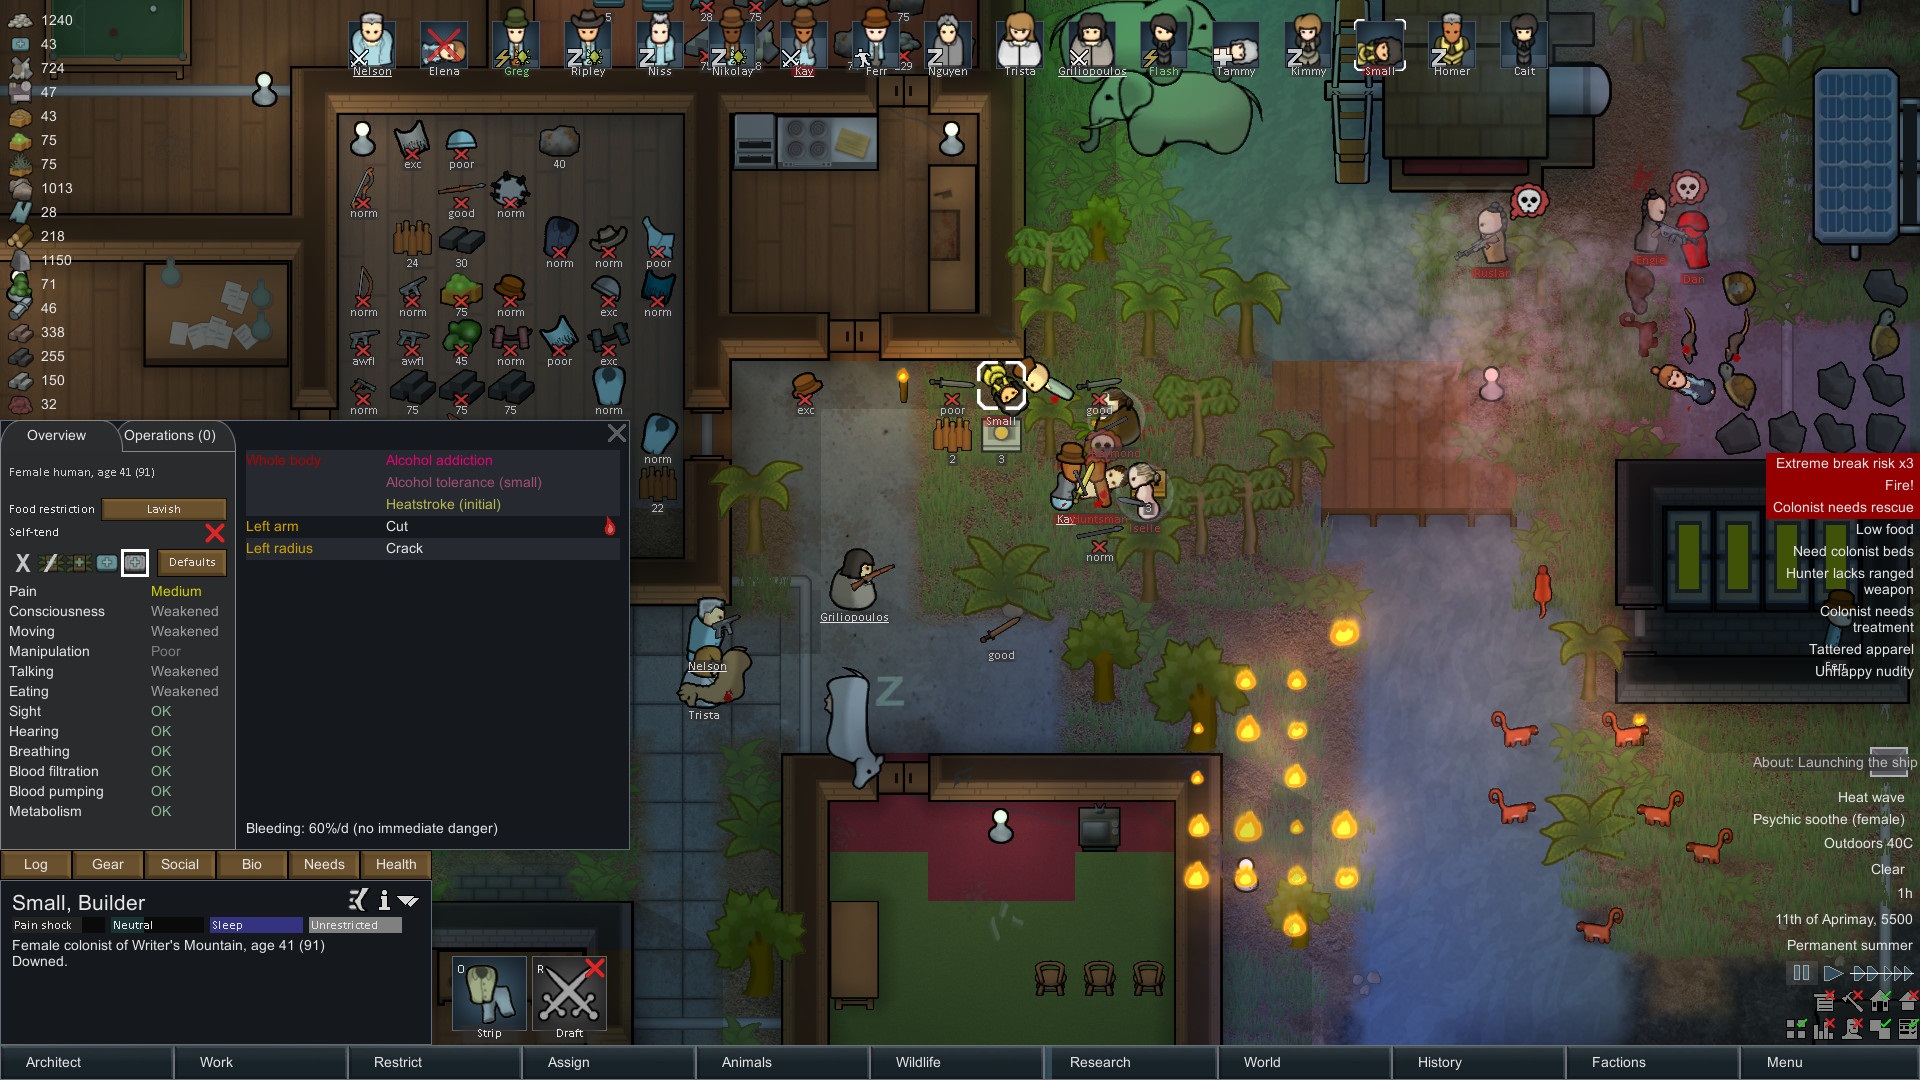 RimWorld screenshot from the official Steam page.